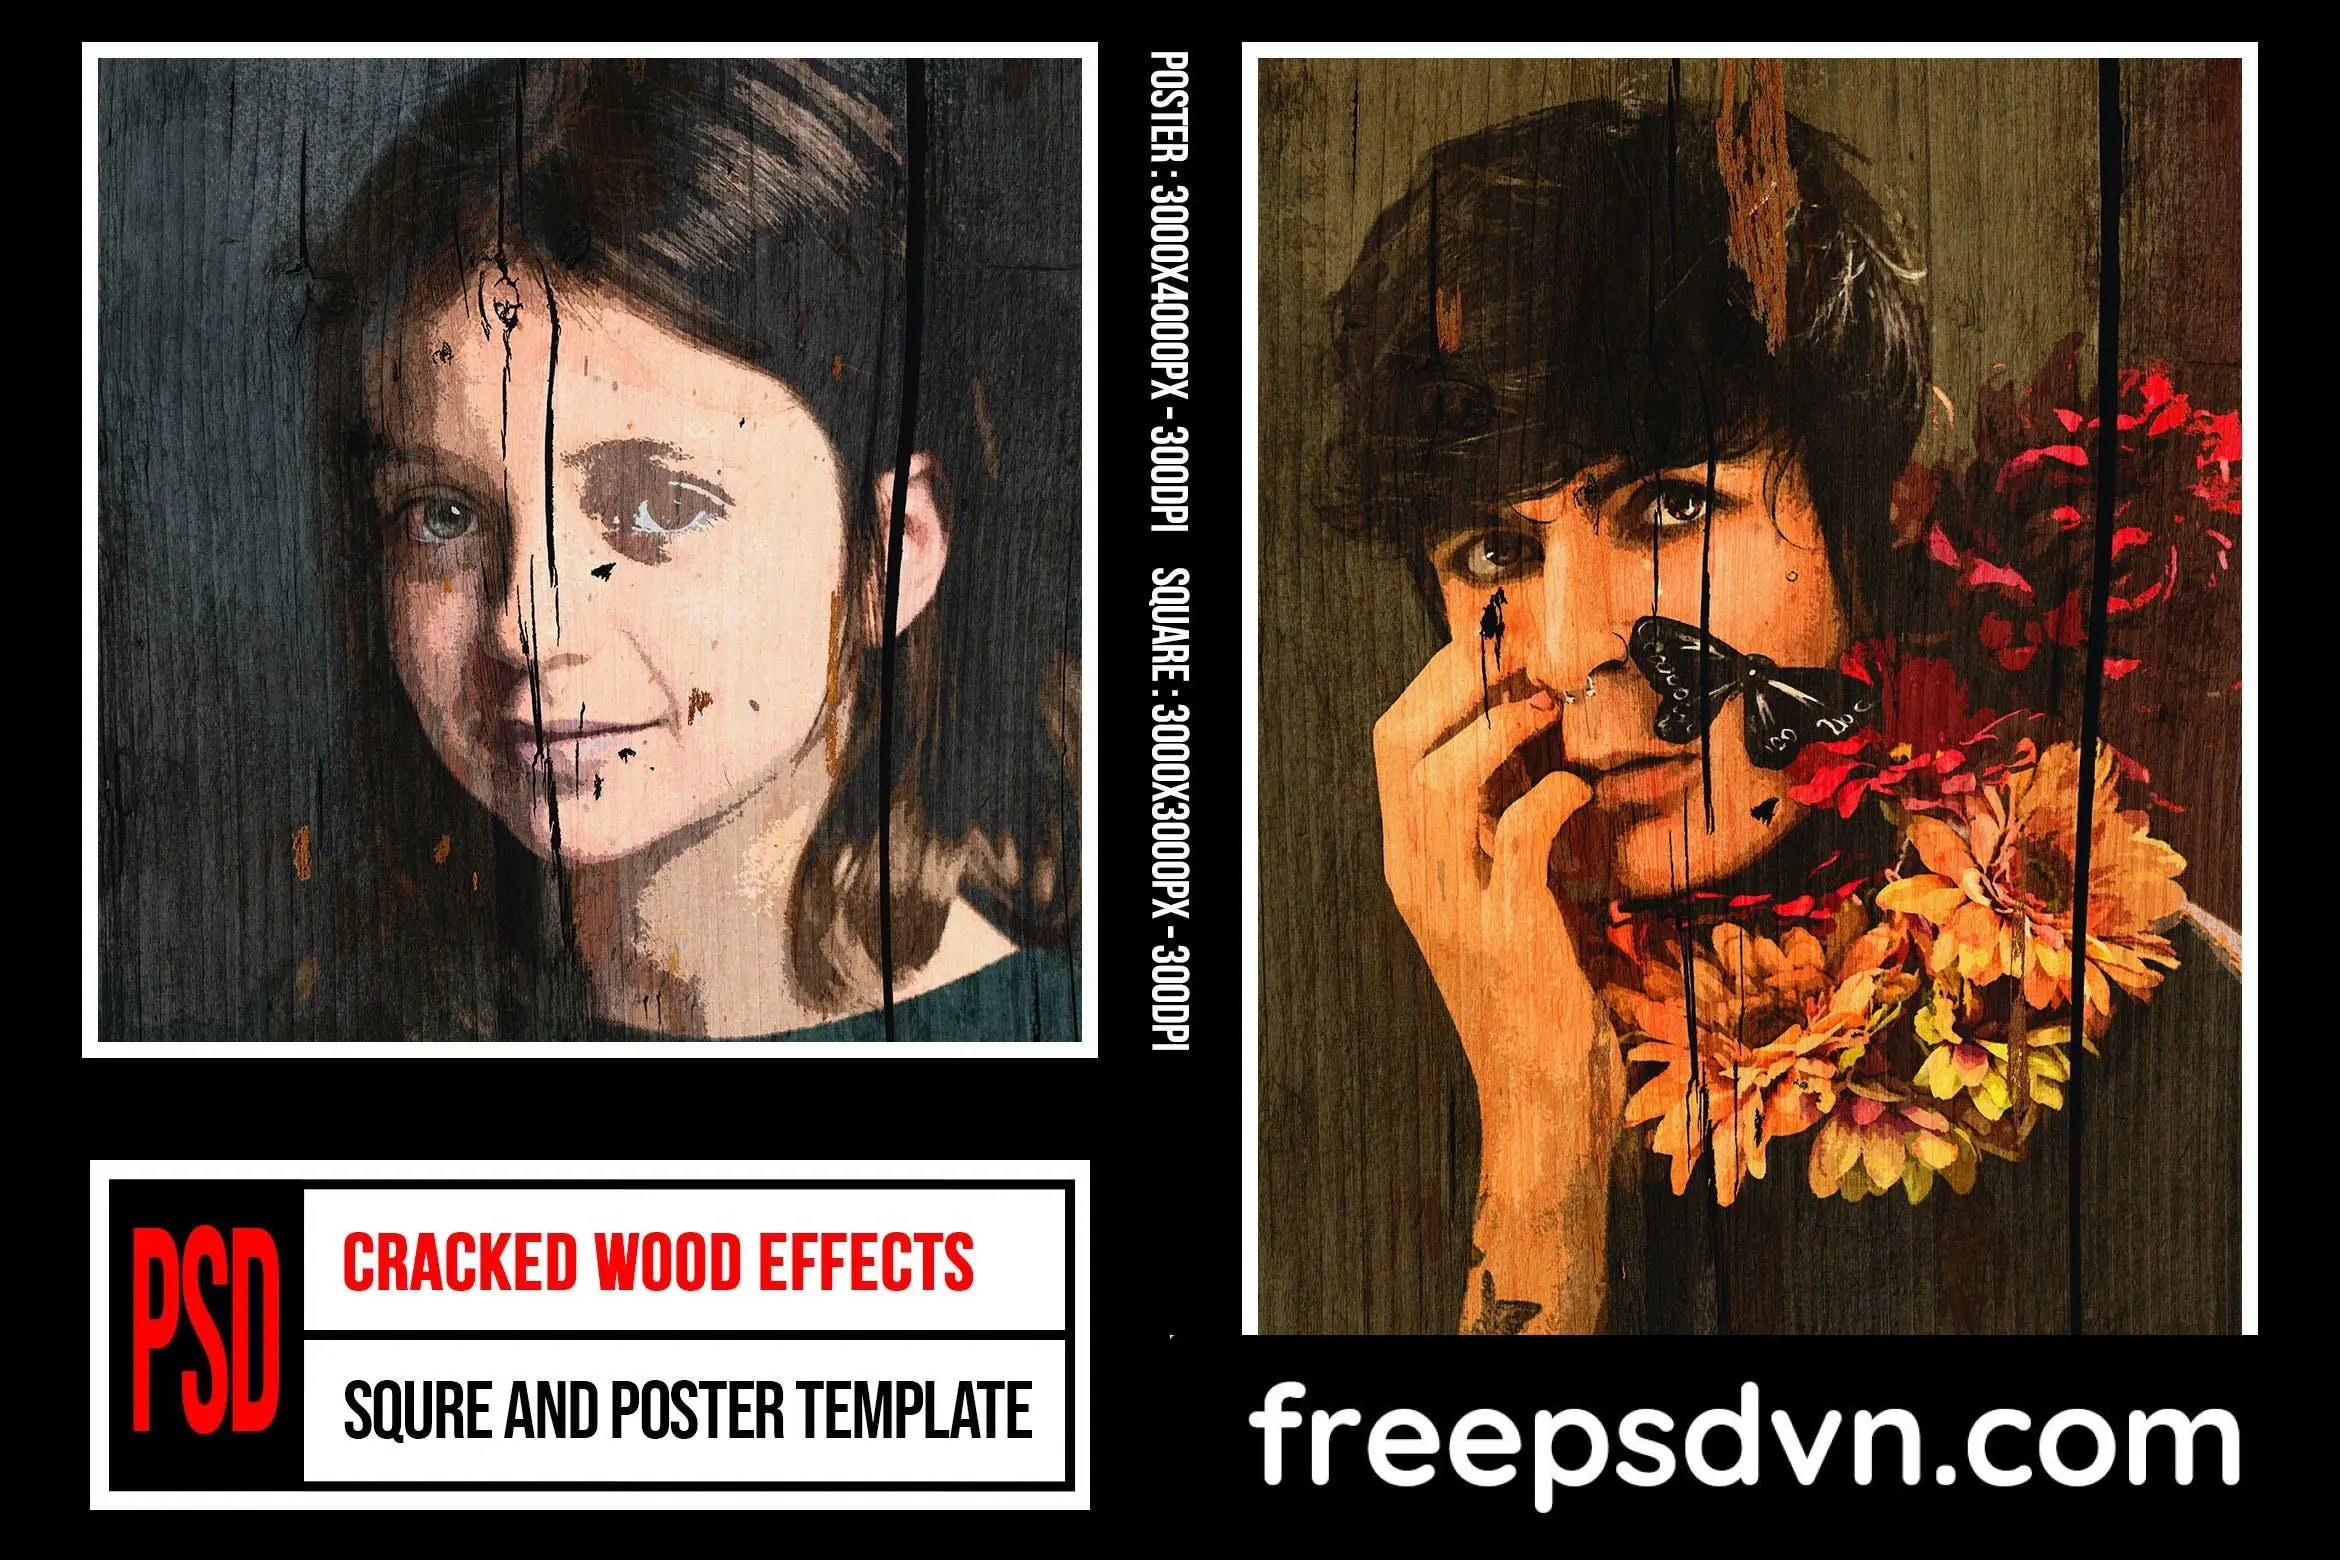 Square & Poster â€“ Cracked Wood Effects KKQYSF7